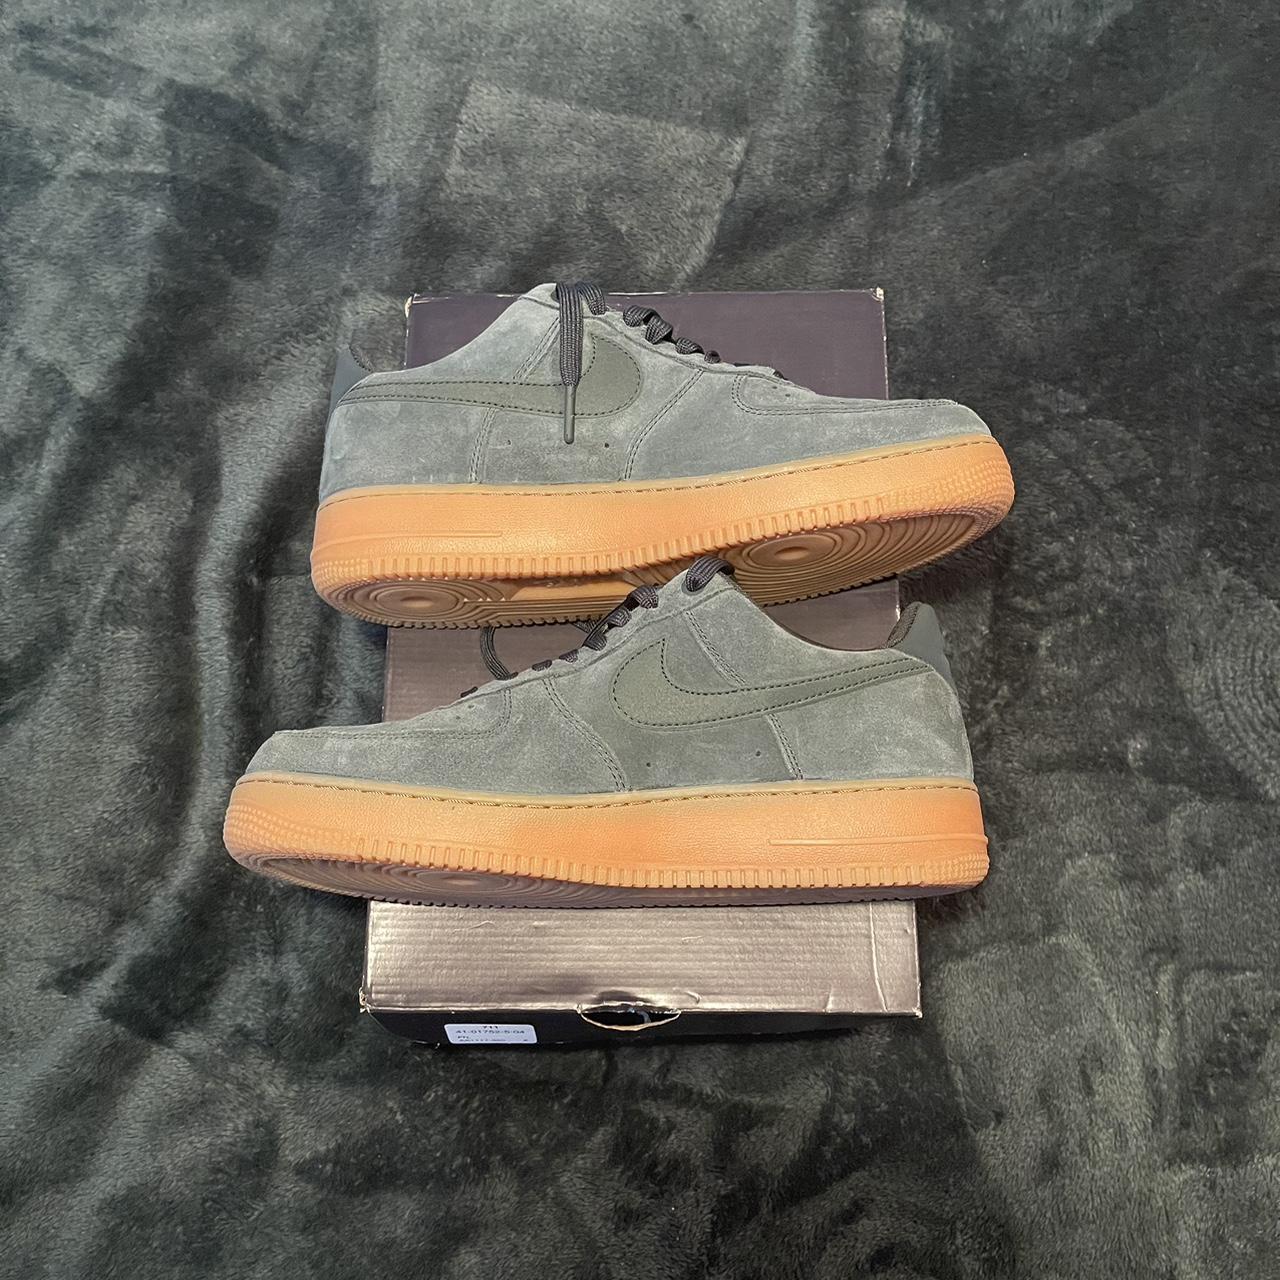 NIKE AIR FORCE 1 HIGH '07 LV8 SUEDE GREEN price €92.50